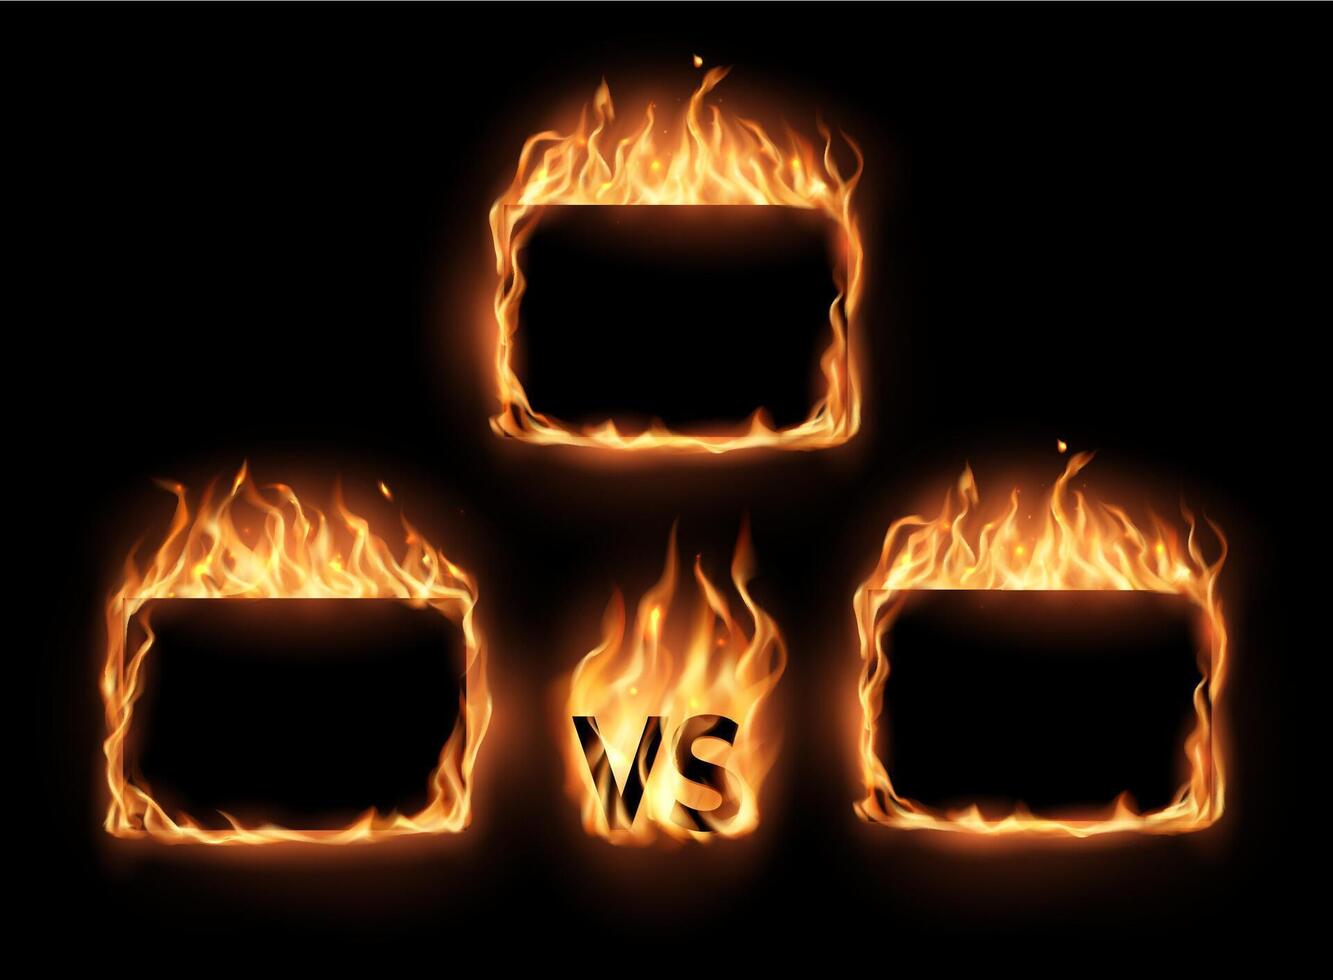 VS versus fire frames for fight battle competition vector